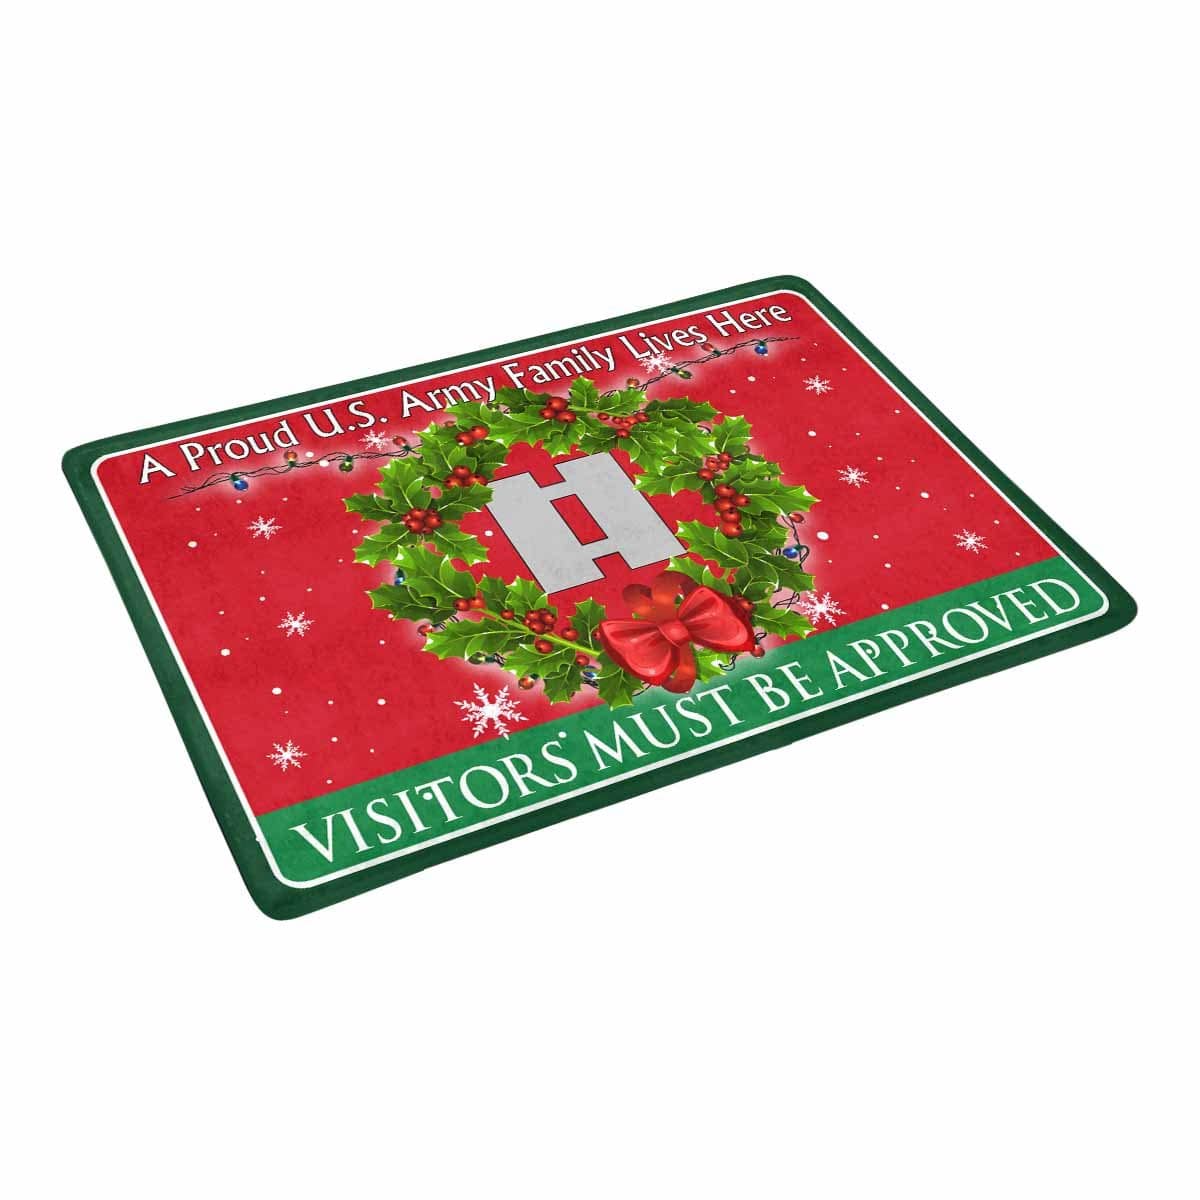 US Army O-3 Captain O3 CPT Commissioned Officer Ranks - Visitors must be approved Christmas Doormat-Doormat-Army-Ranks-Veterans Nation